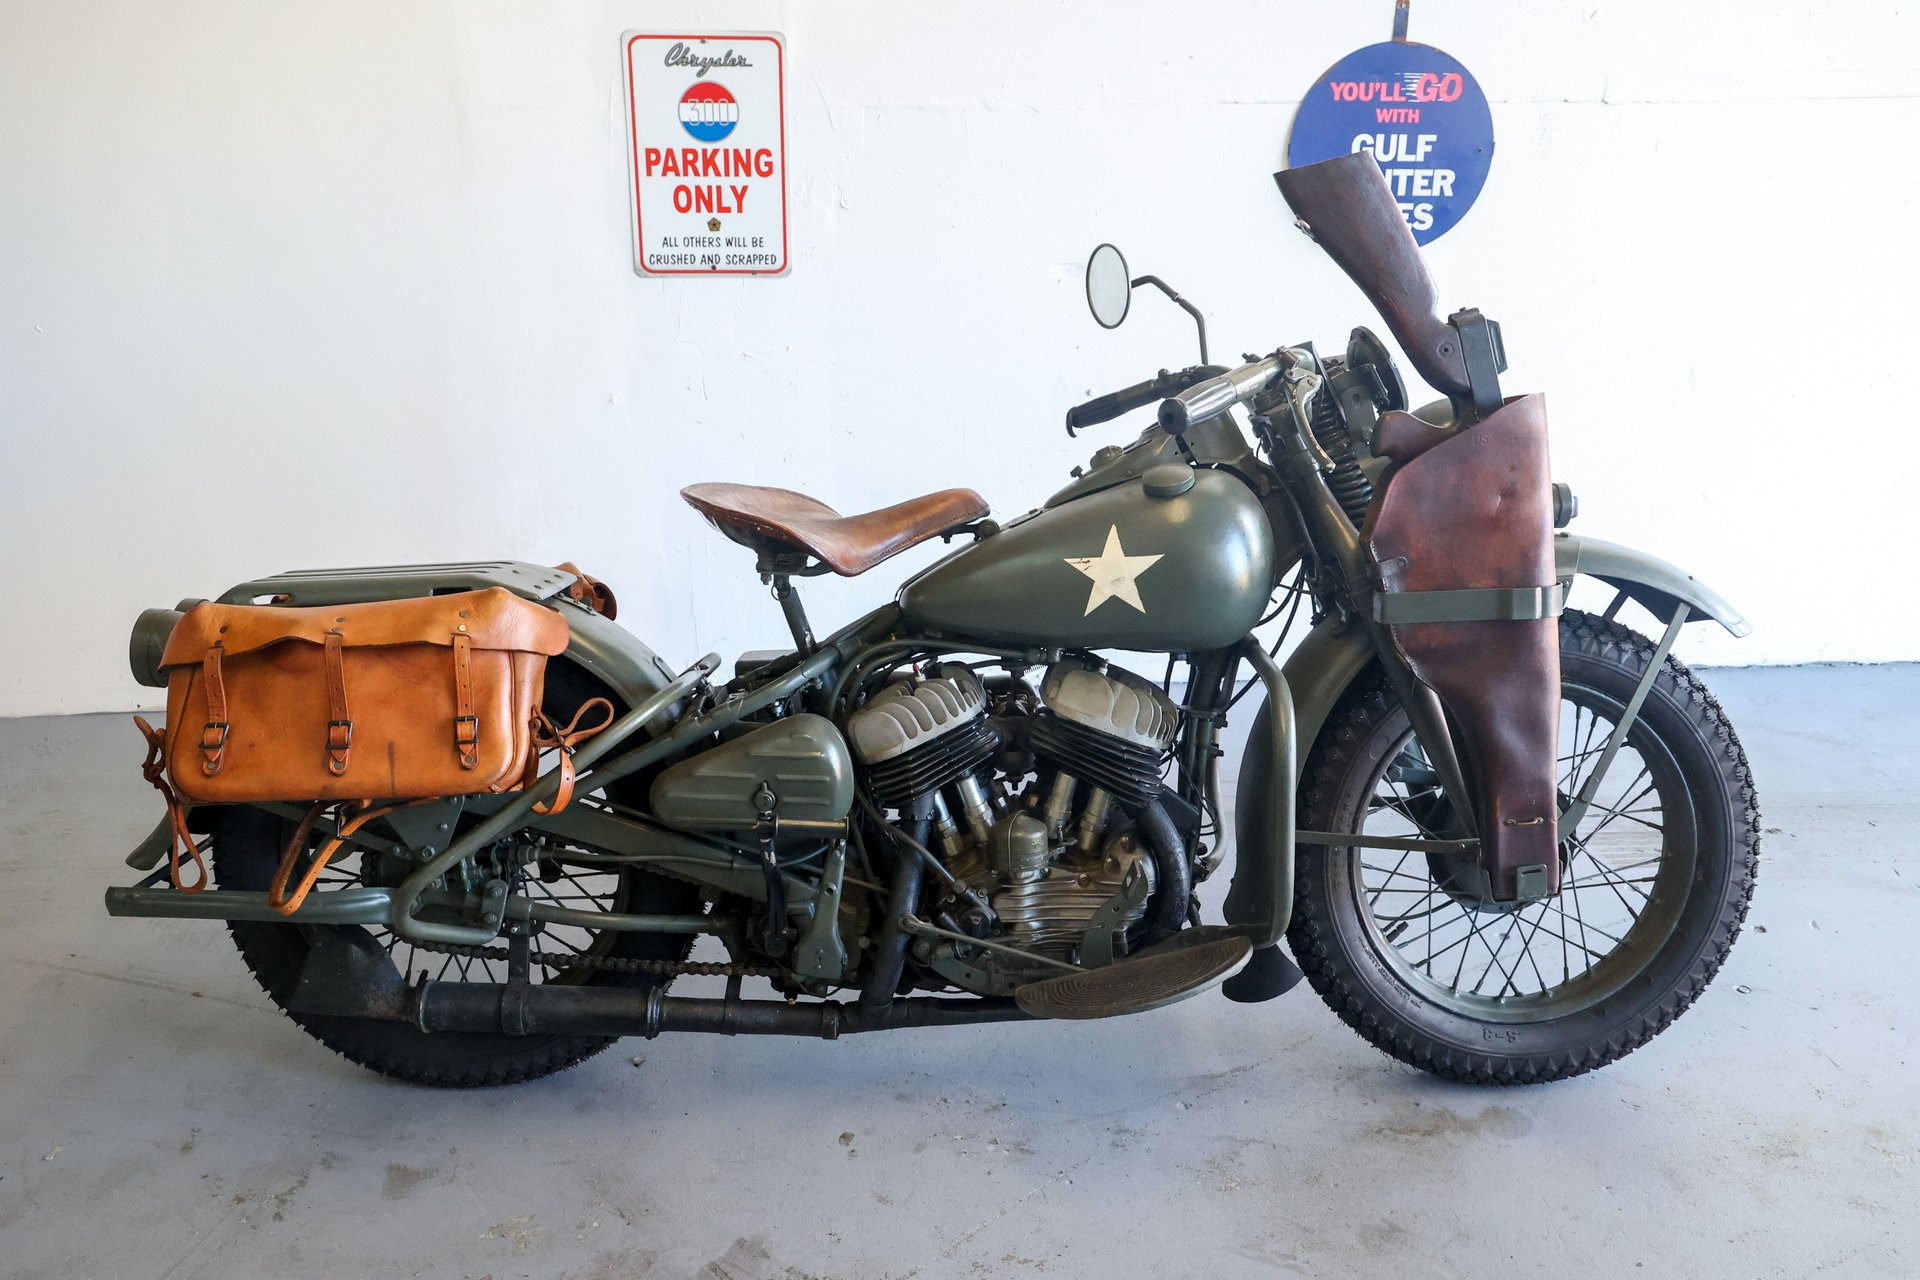 WWII Vehicles - 1942 Harley-Davidson WLA - Patch (Limited Run